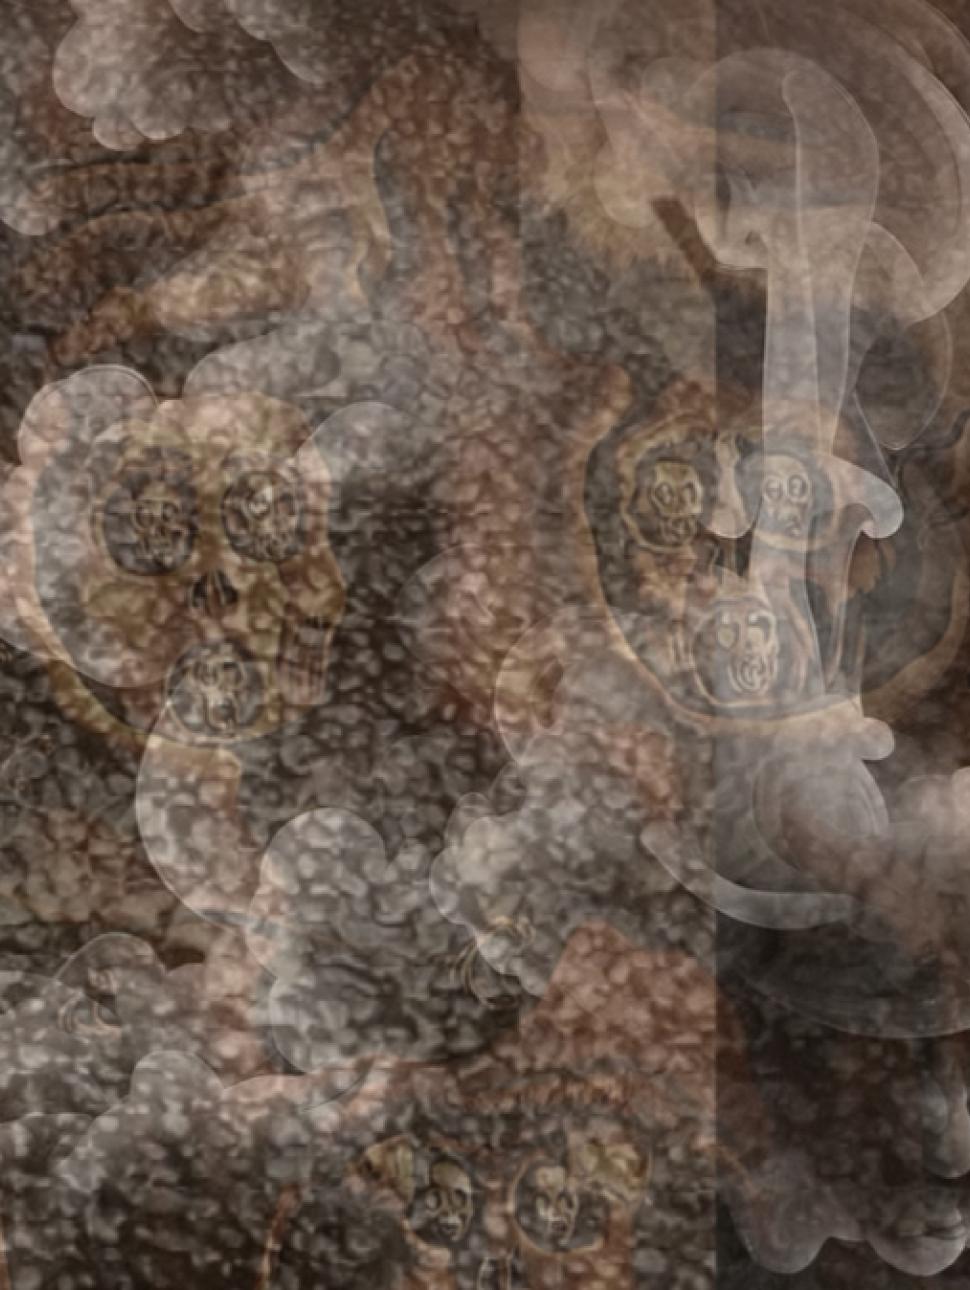 A styalistic image of a cloud of smoke imposed over a brown image of skulls and faces